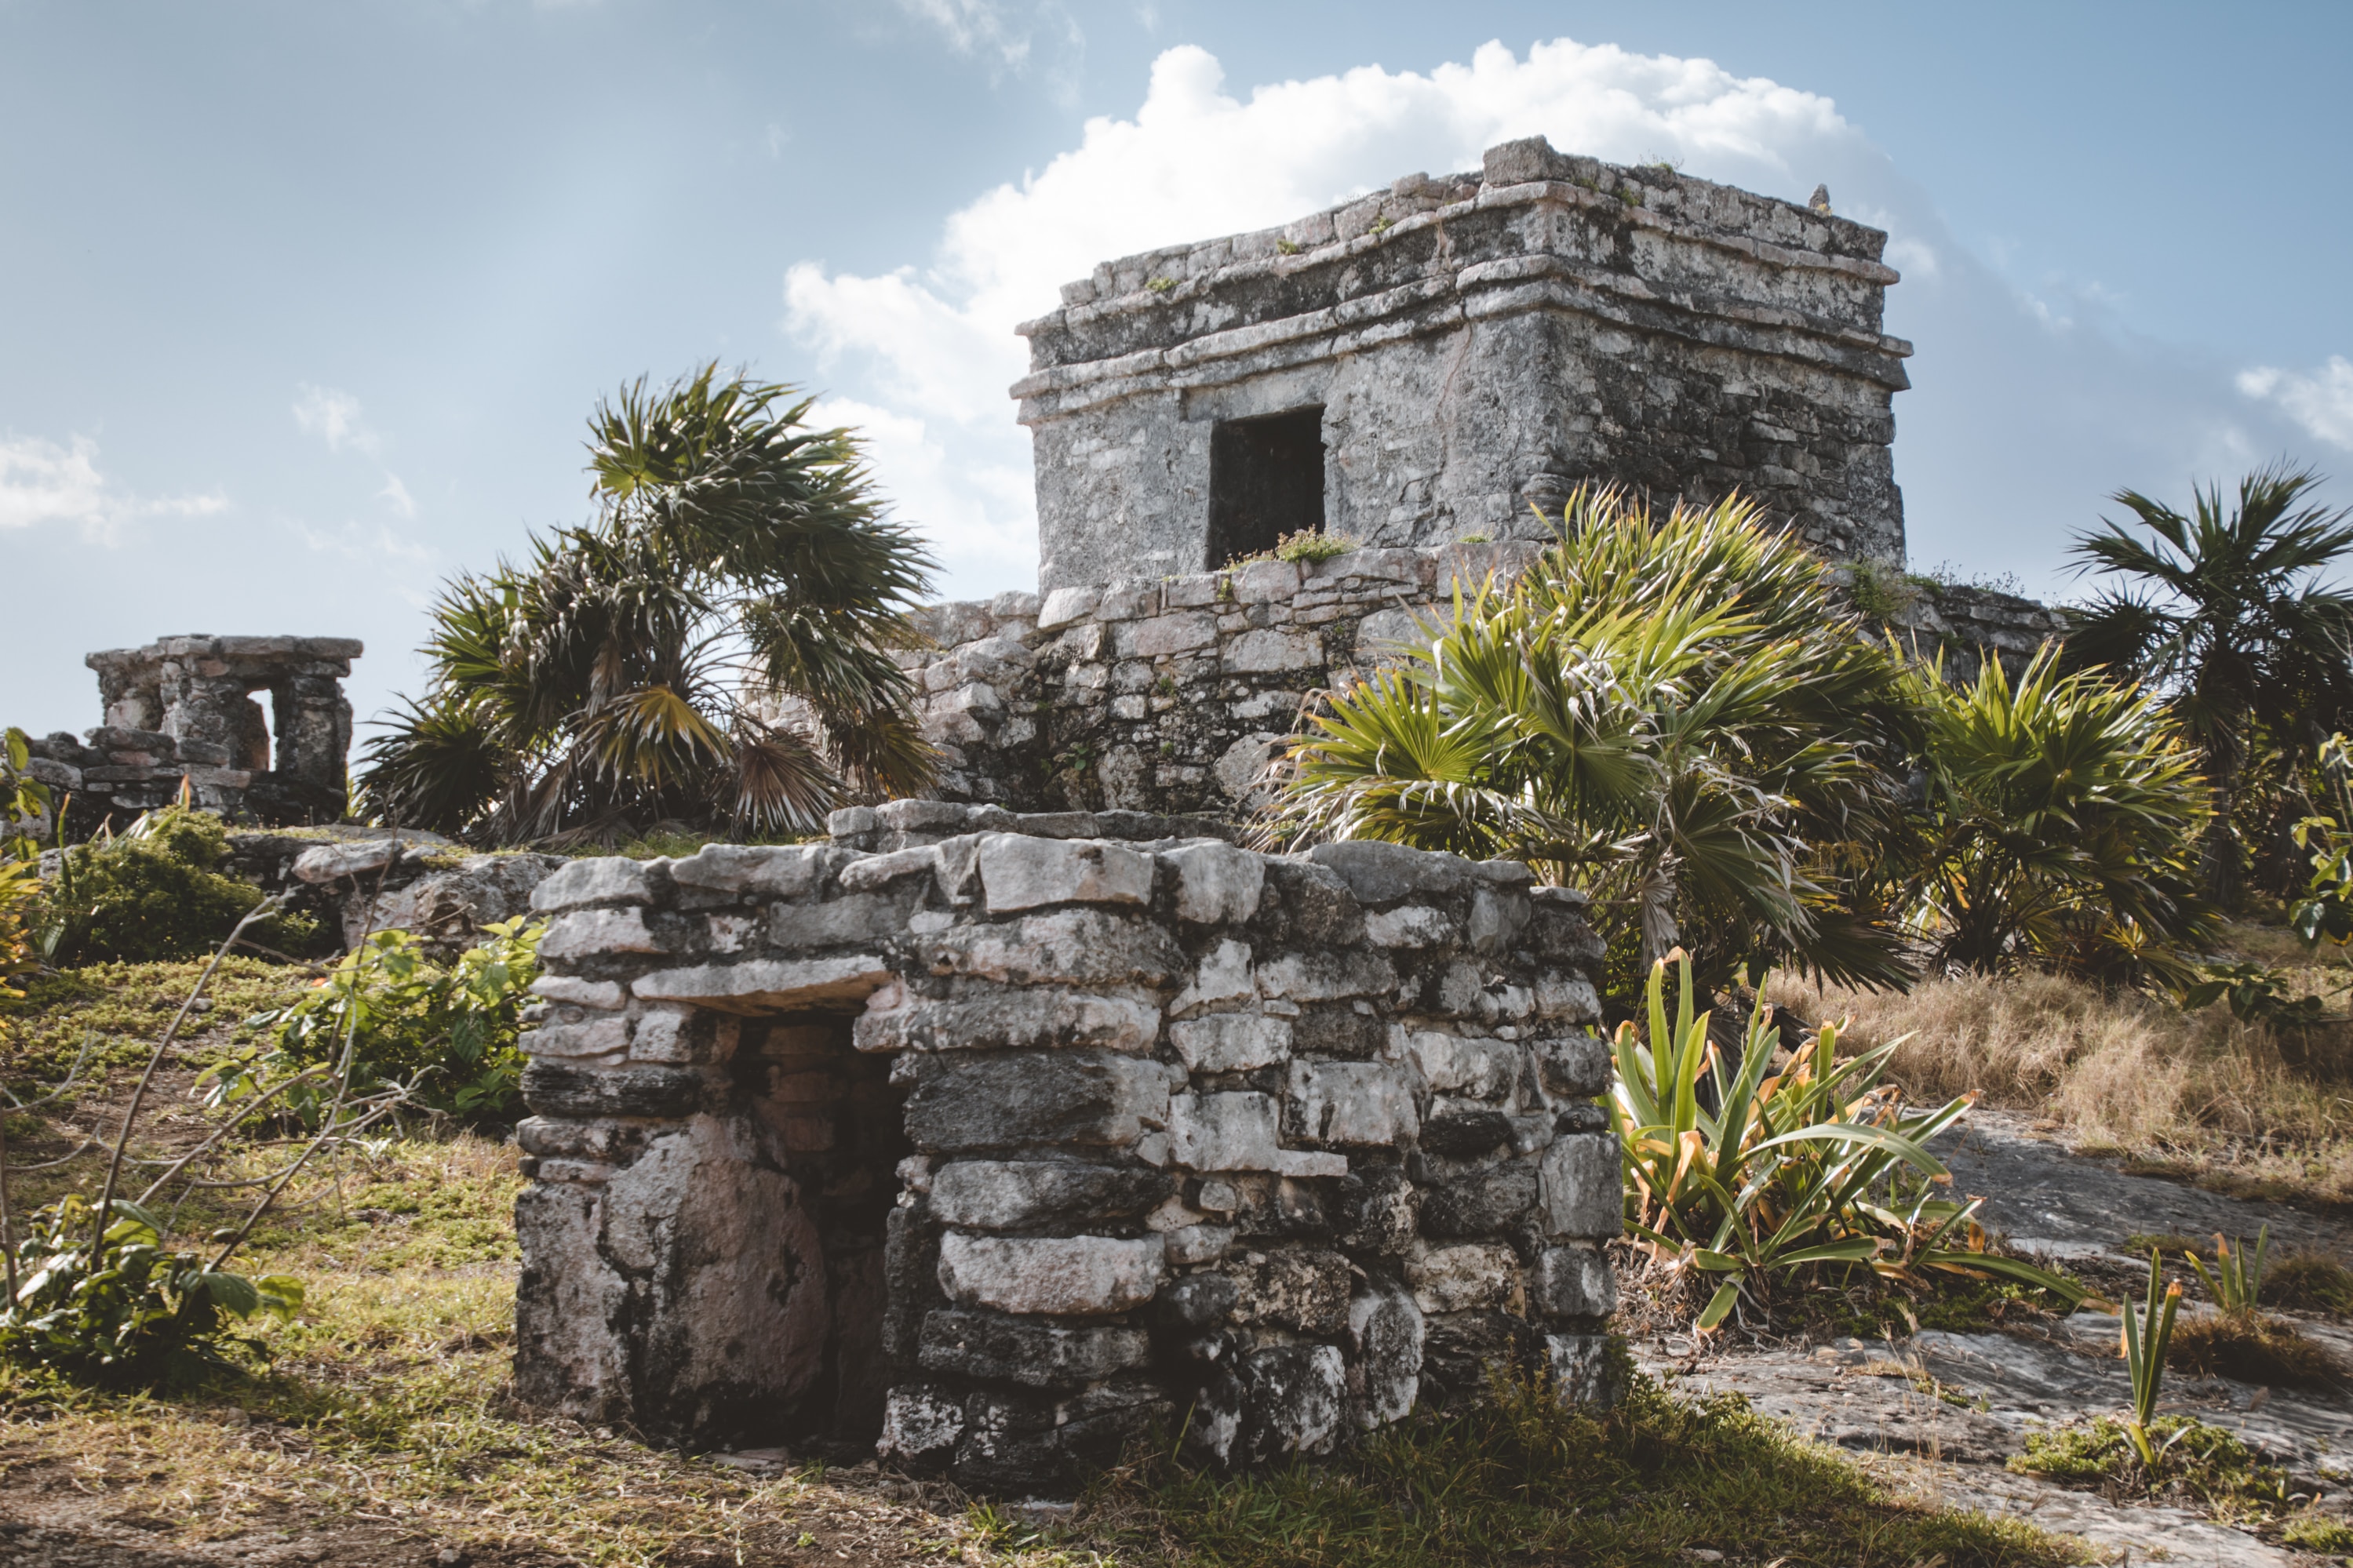 <p>Tulum is located on Mexico’s Caribbean coast. It offers a mix of stunning beaches, turquoise waters, and of course the ancient Mayan Ruins. These historical treasures are the framework of a thriving bohemian beach town.</p><p><strong>Highlights:</strong> Mayan ruins, cenotes (natural sinkholes)</p><p><strong>Activities to Enjoy:</strong> Swimming, hiking, photography</p>